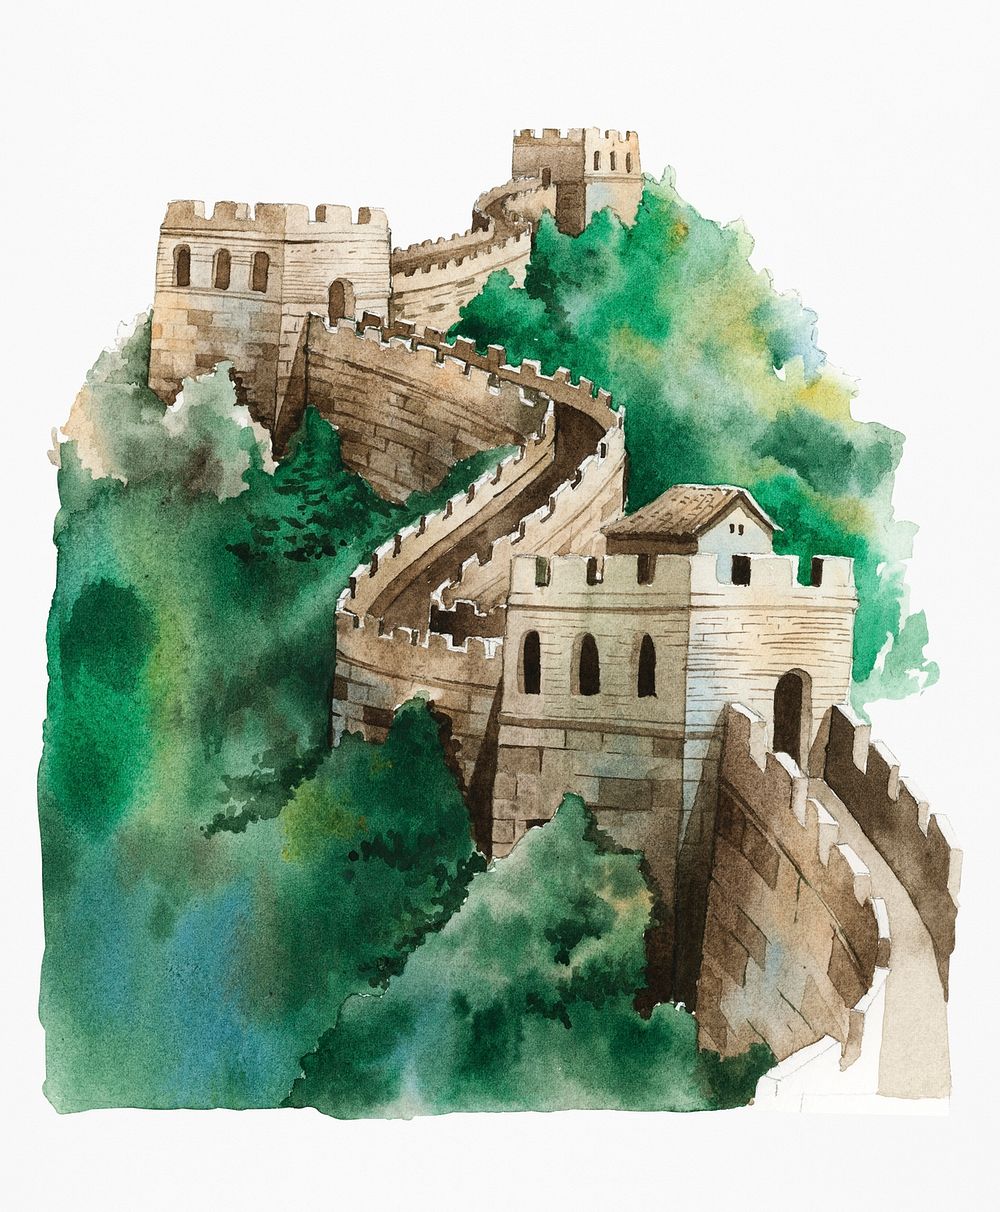 The Great Wall of China painted by watercolor